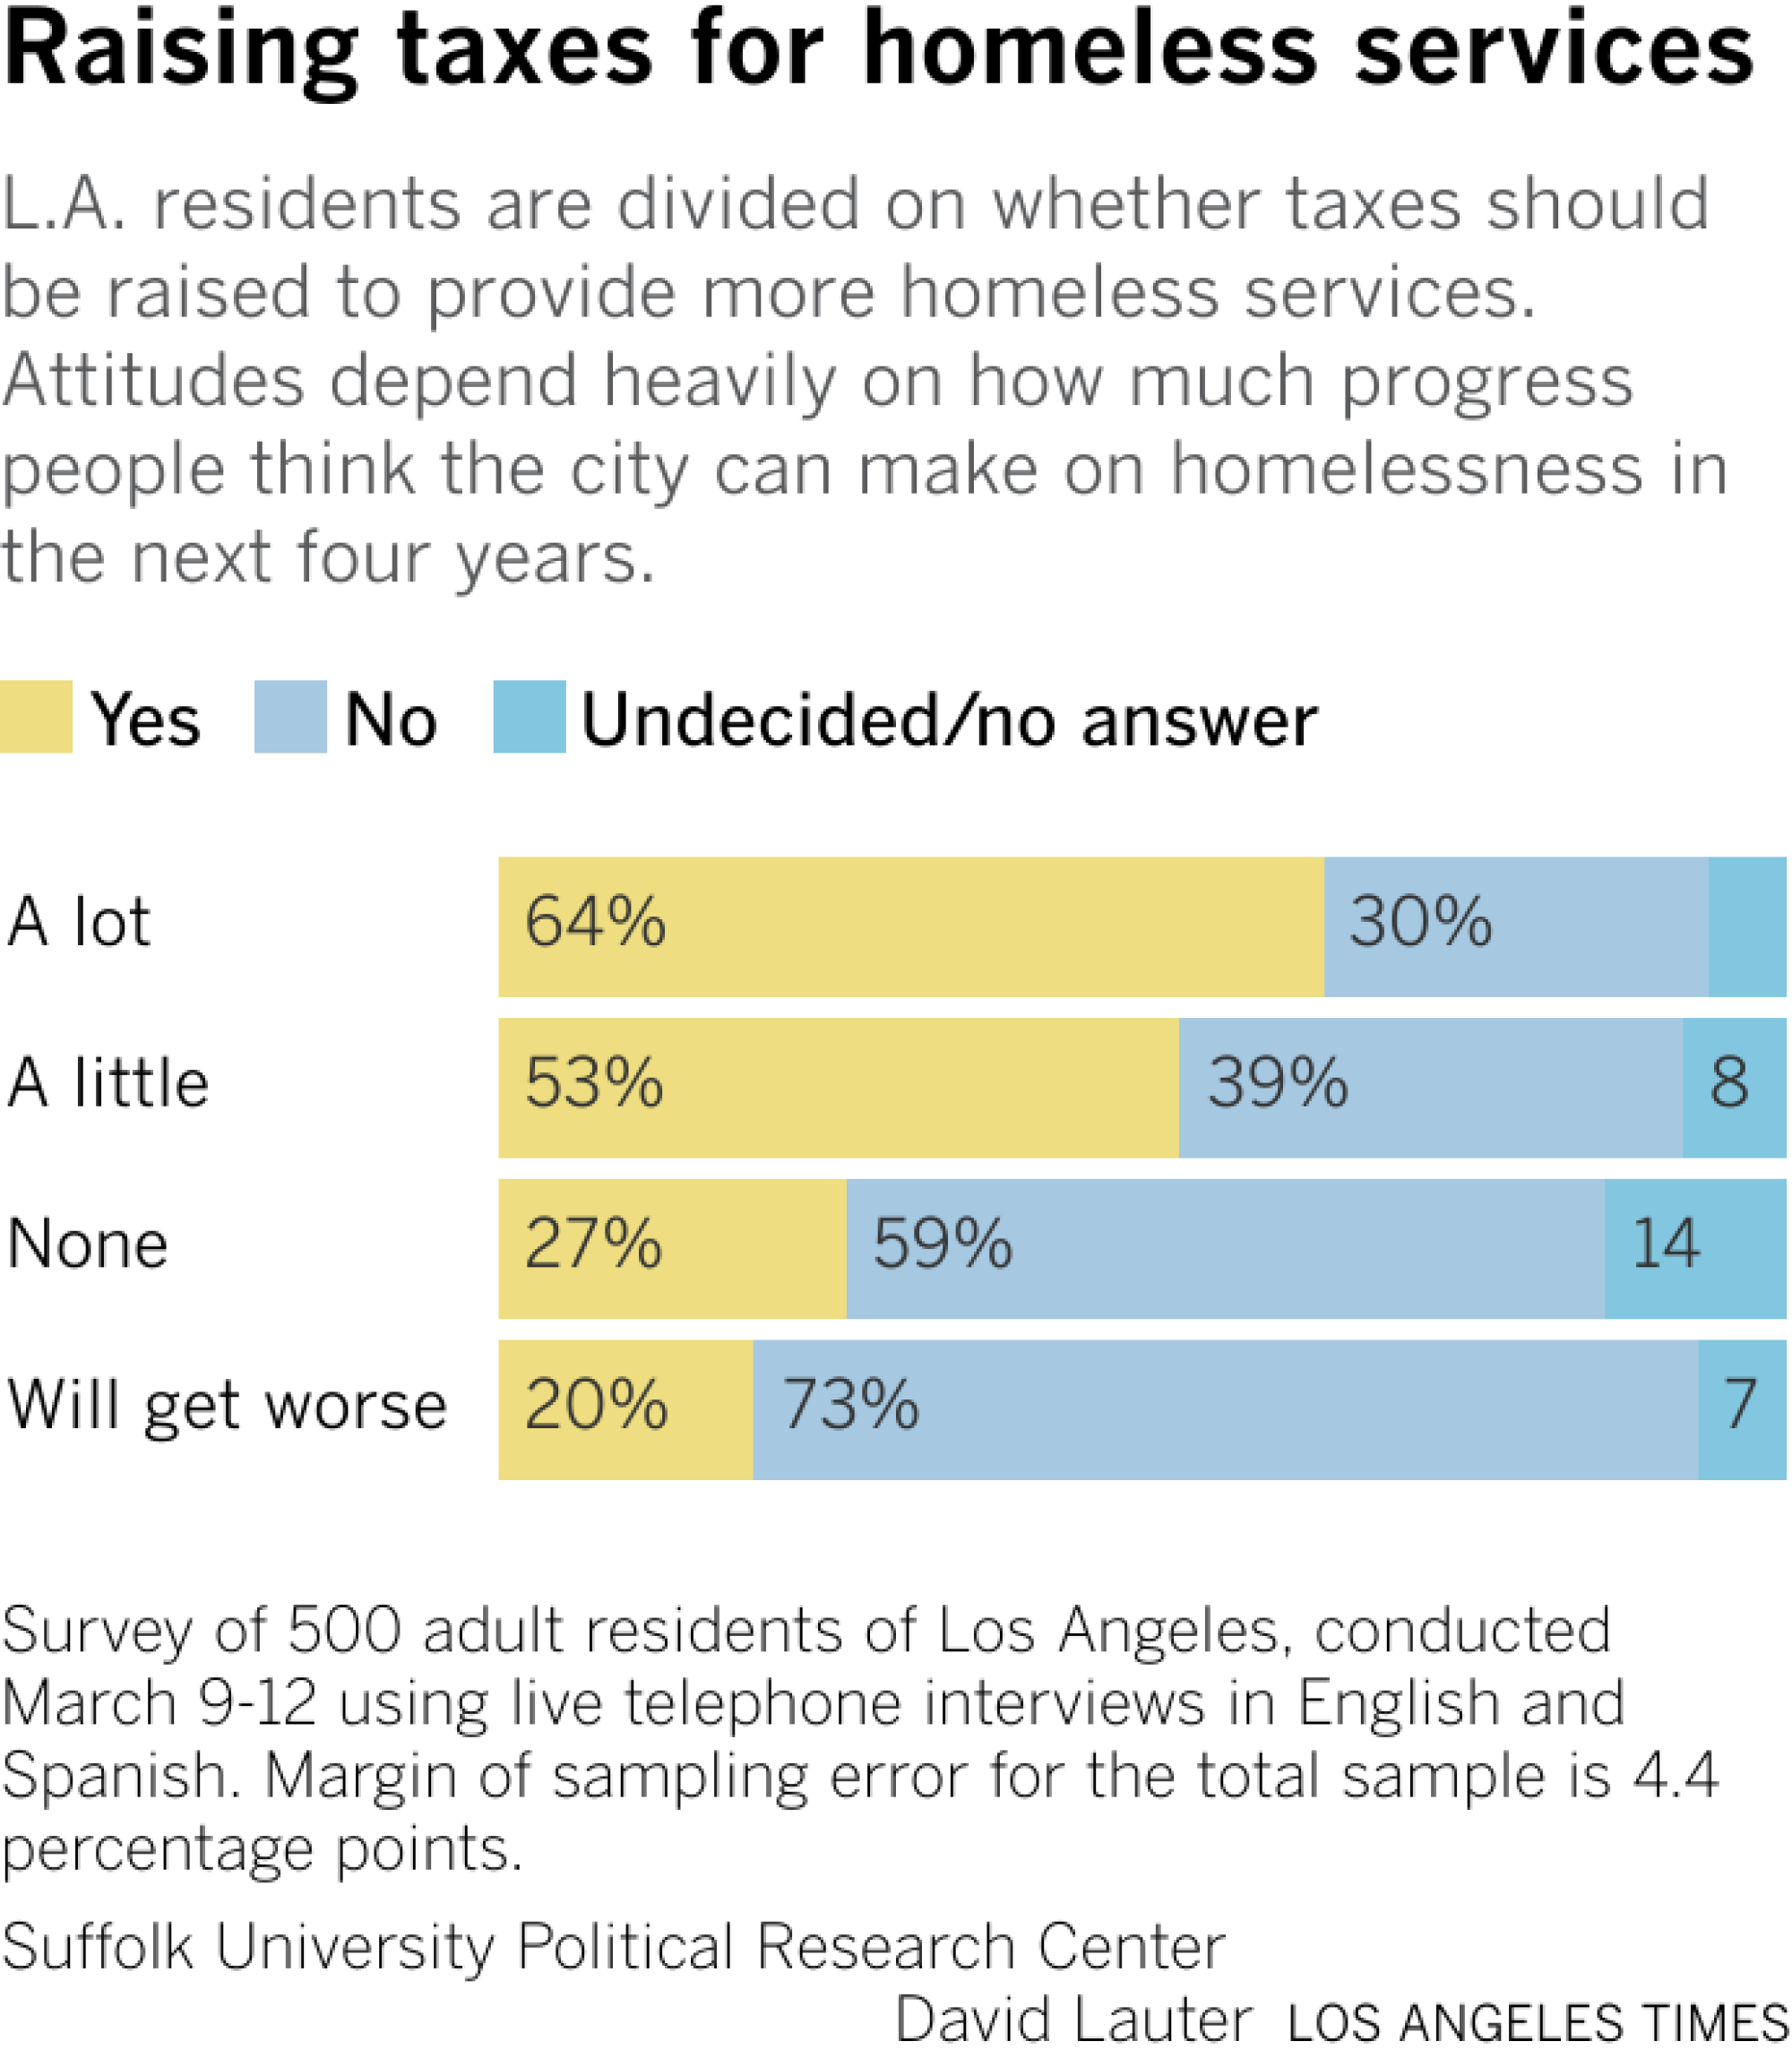 Bars show the share of LA residents who would support or oppose raising taxes, divided by whether they expect to see a lot of progress on homelessness, a little progress, no progress or for the situation to get worse.